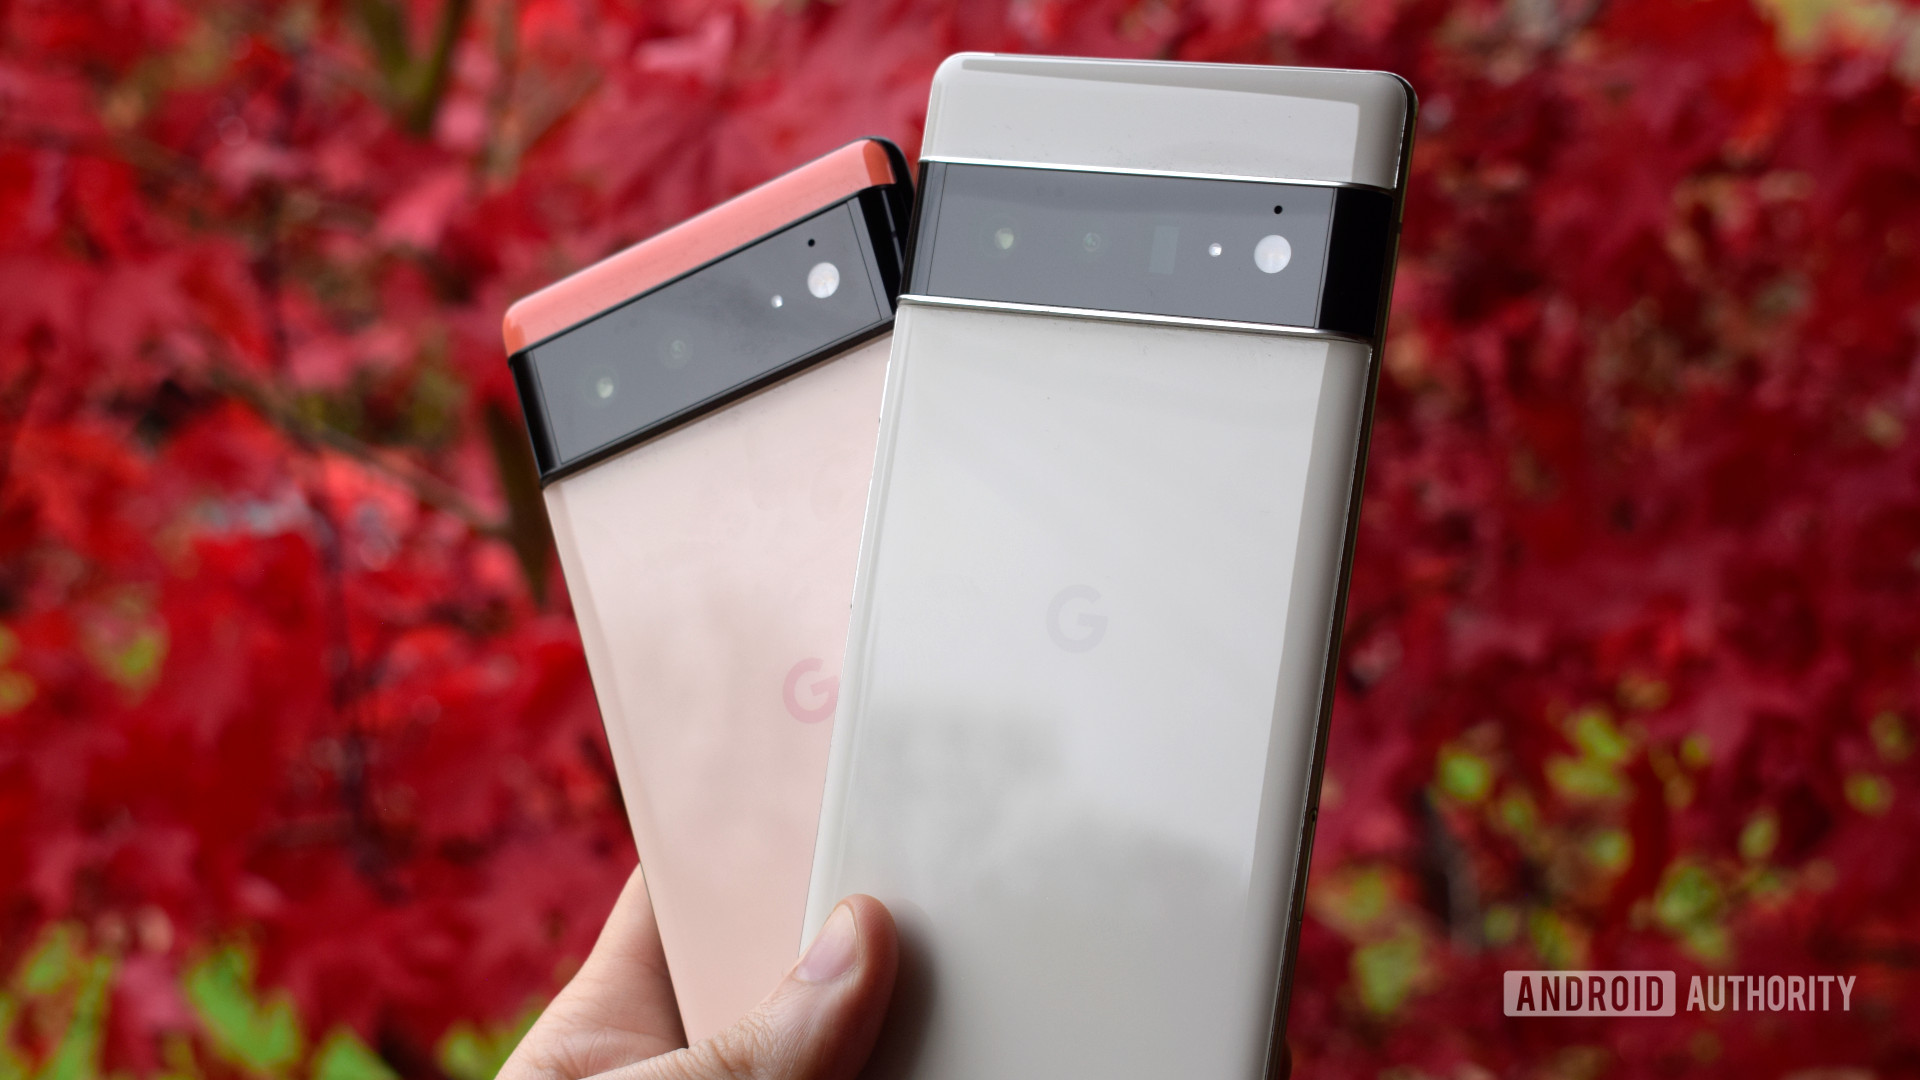 Google Pixel 6 and Pixel 6 Pro on red leaf background - Phones with stock Android